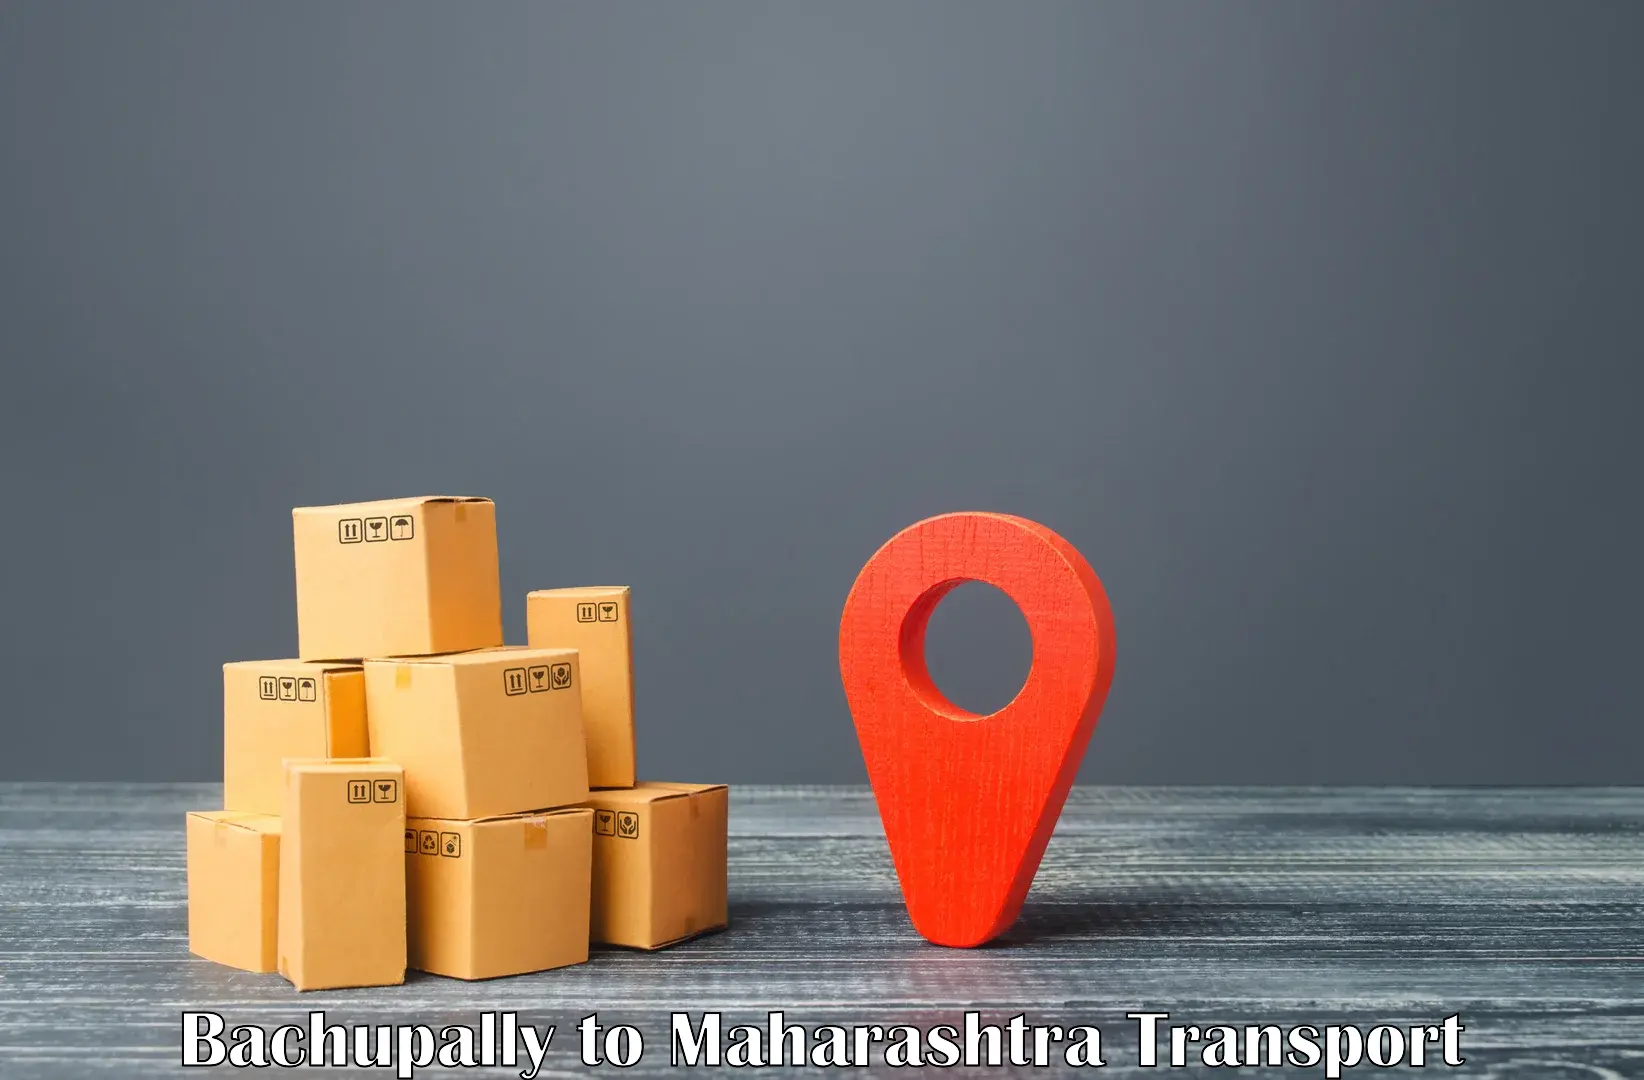 Goods delivery service Bachupally to Mumbai Port